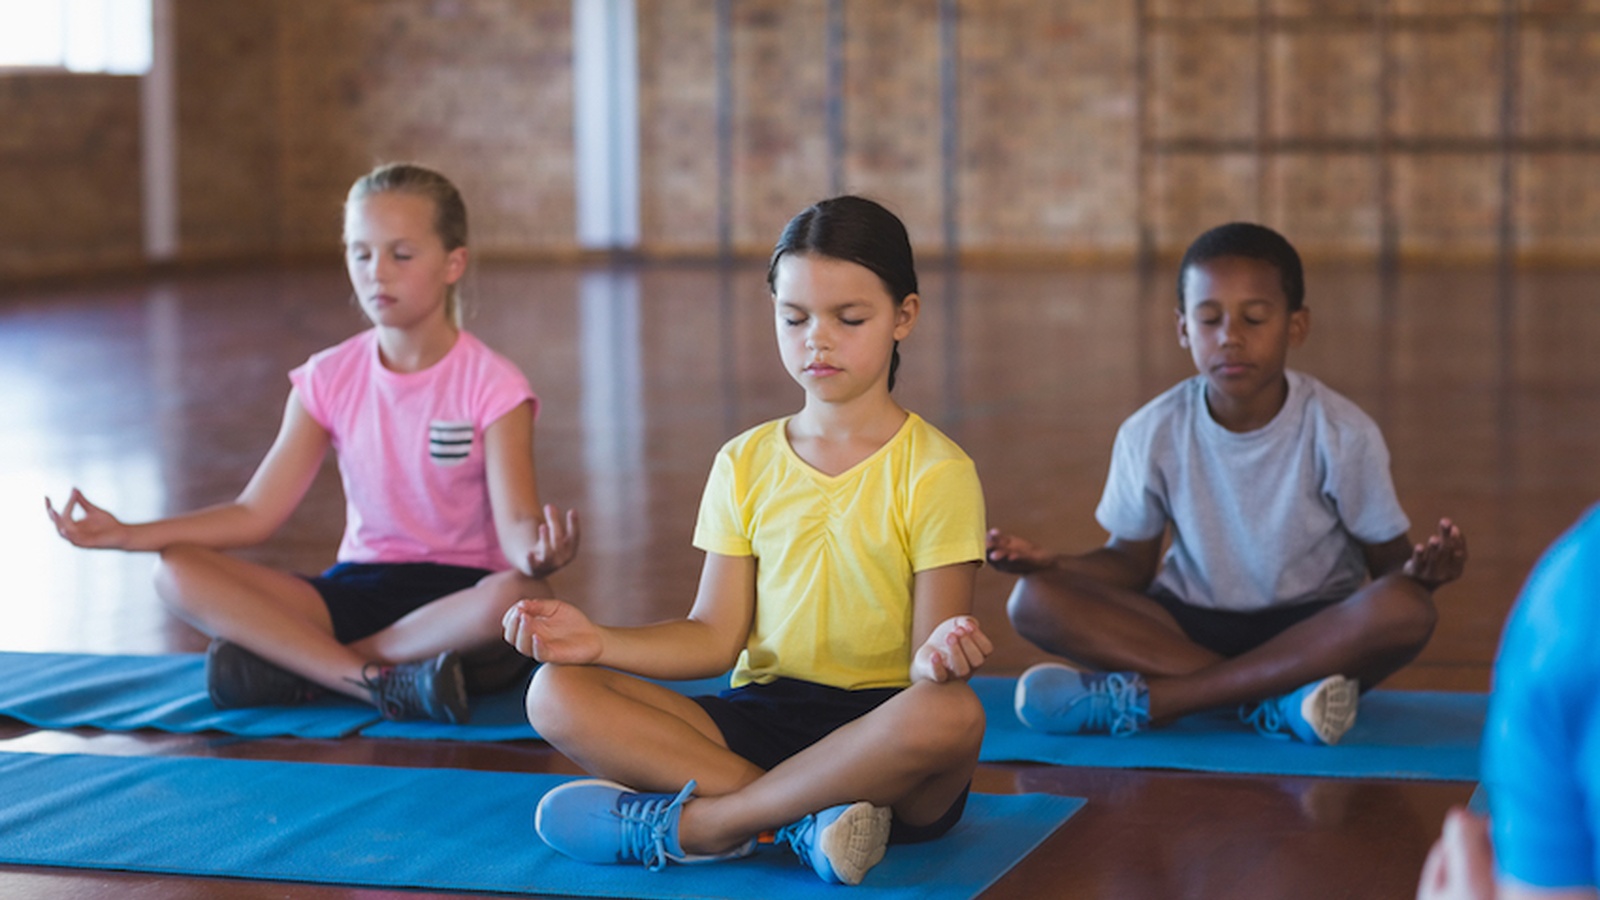 School Replaces Detention With Meditation - This Is The Stunning Response